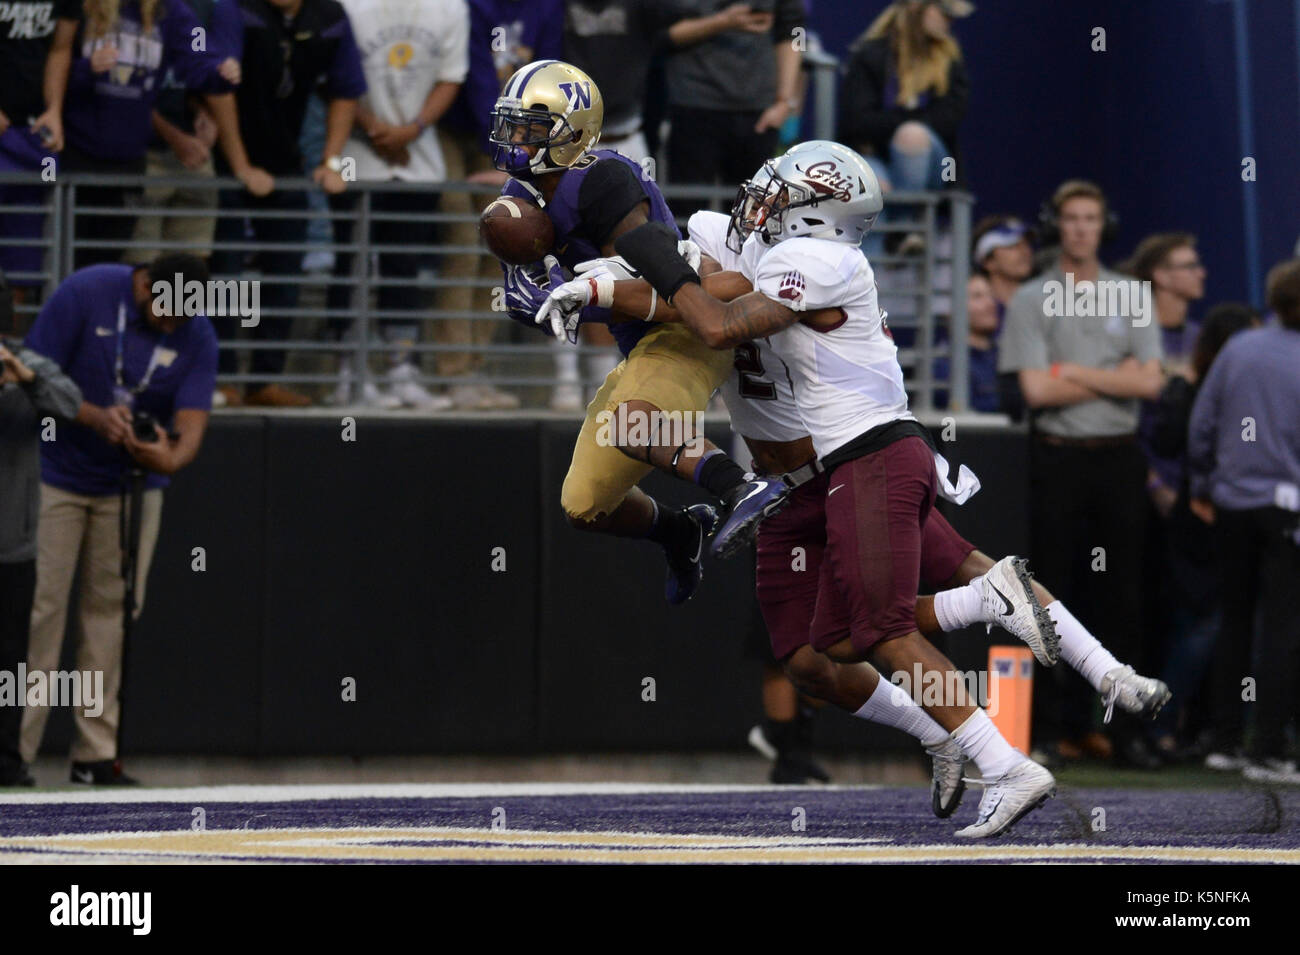 Seattle, WA, USA. 9th Sep, 2017. UW receiver Chico McClatcher (6) goes up for a pass in the endzone against the Montana defense in a game between the Montana Grizzlies and the Washington Huskies. The game was played at Husky Stadium on the University of Washington campus in Seattle, WA. Jeff Halstead/CSM/Alamy Live News Stock Photo